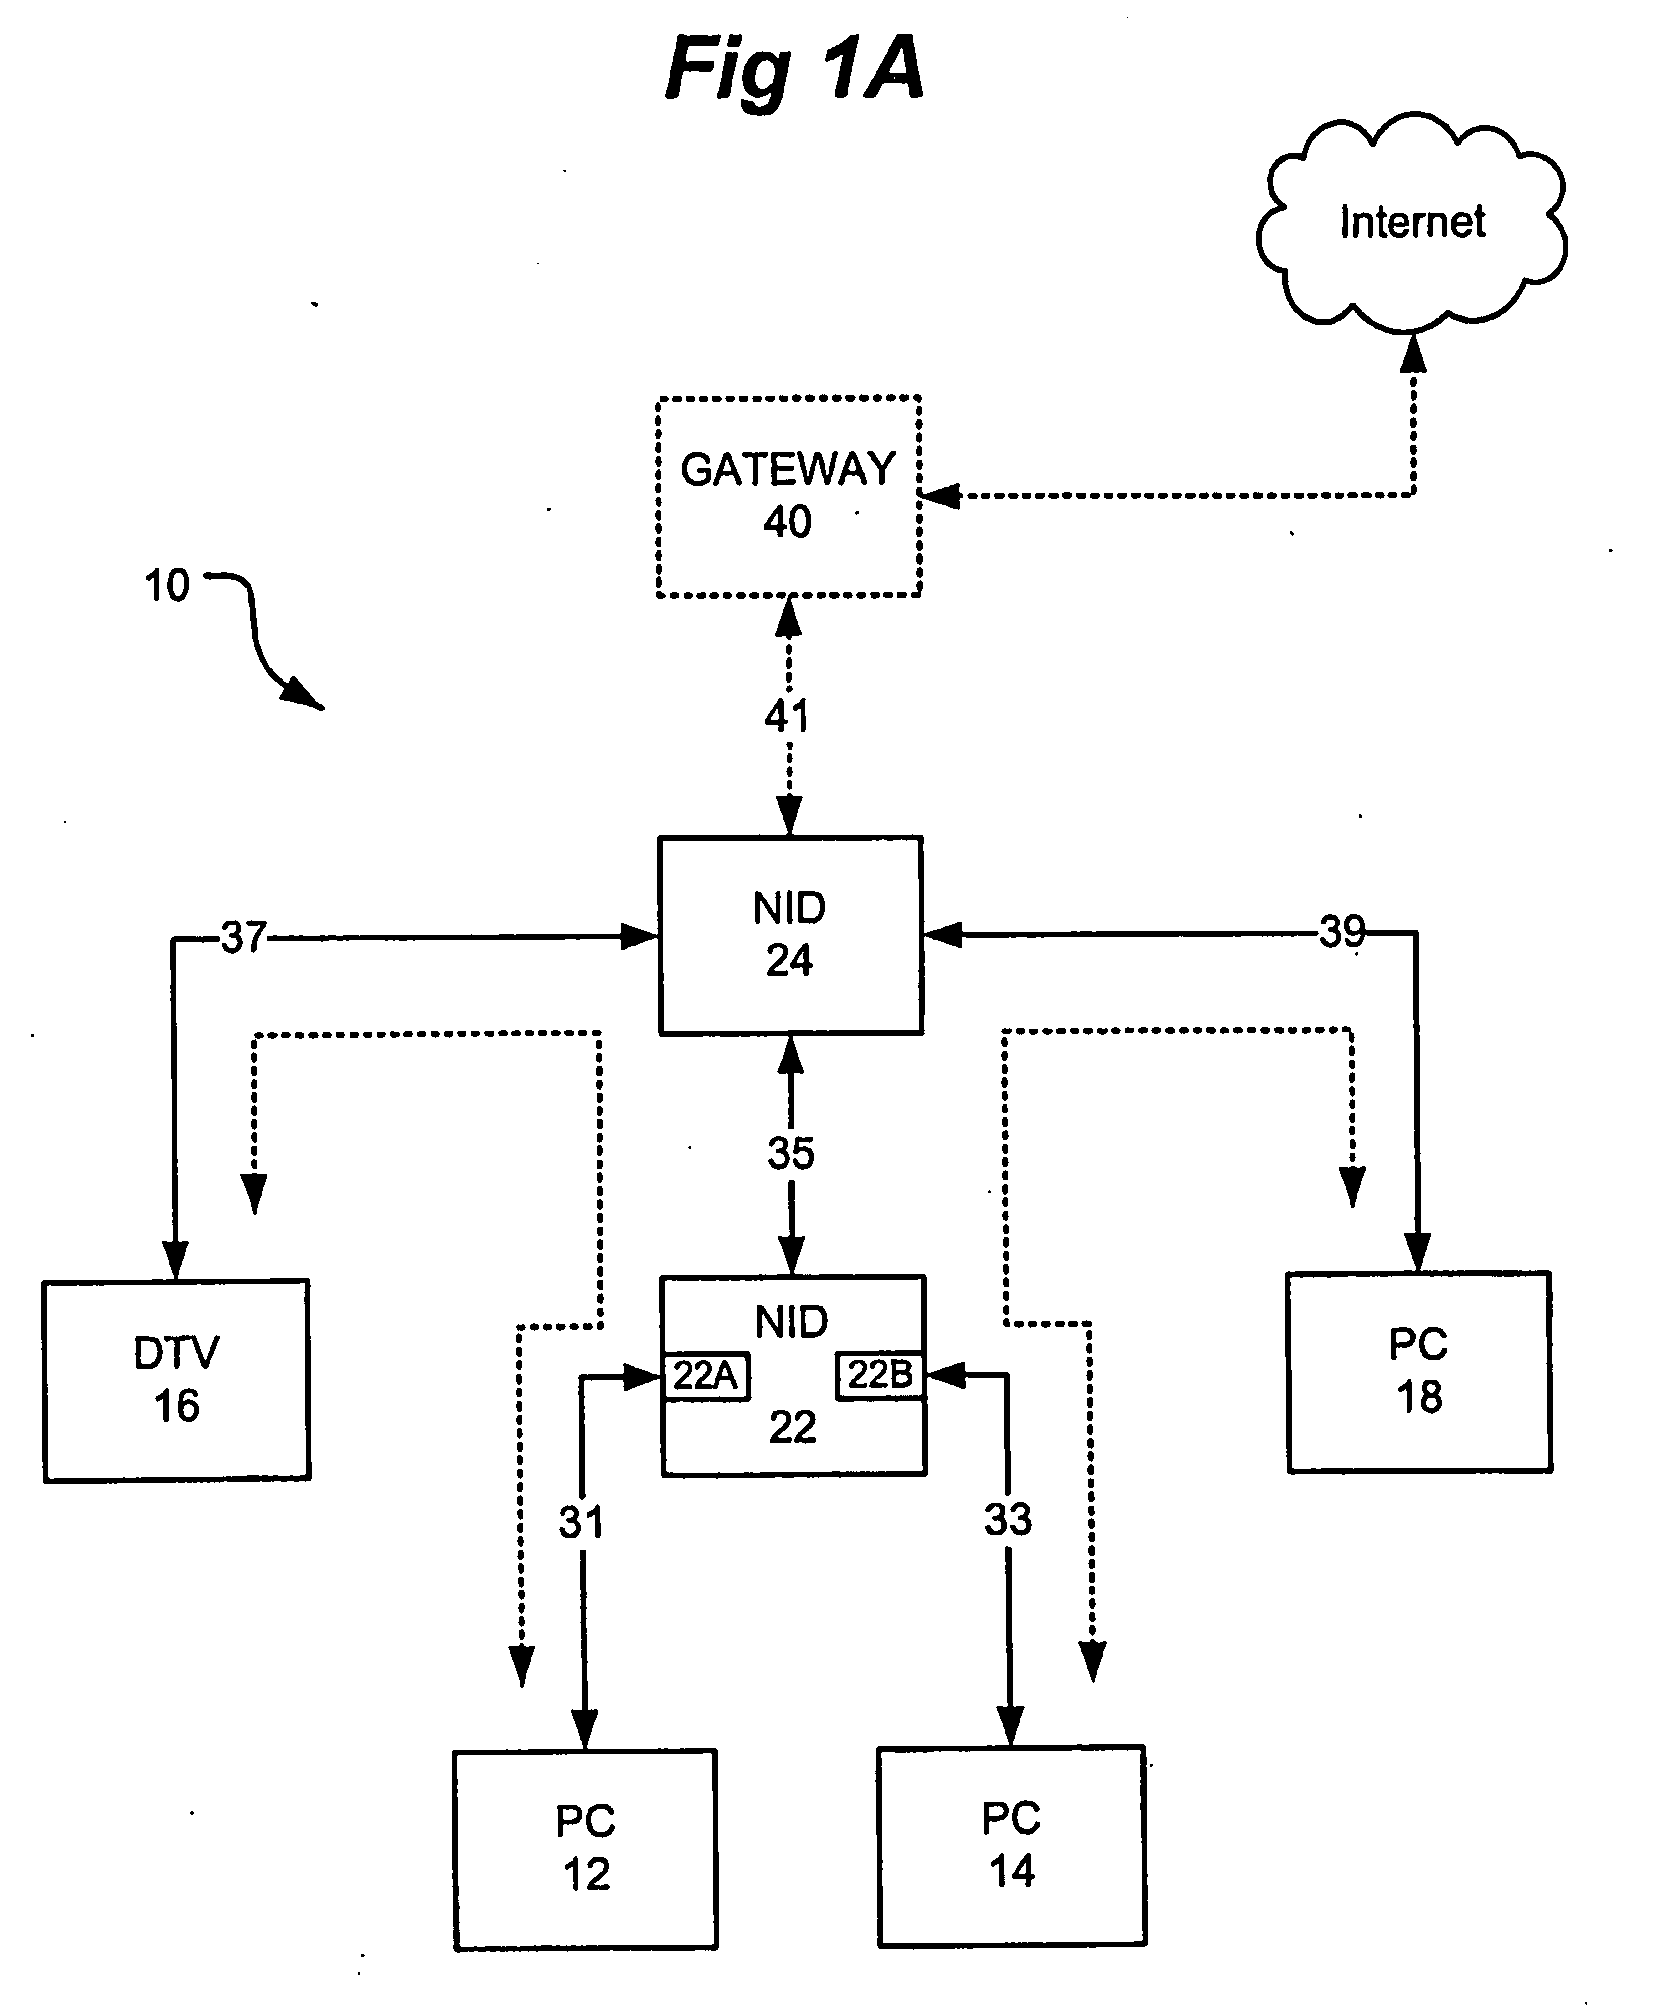 System and Method for Enhancing Network Quality of Service